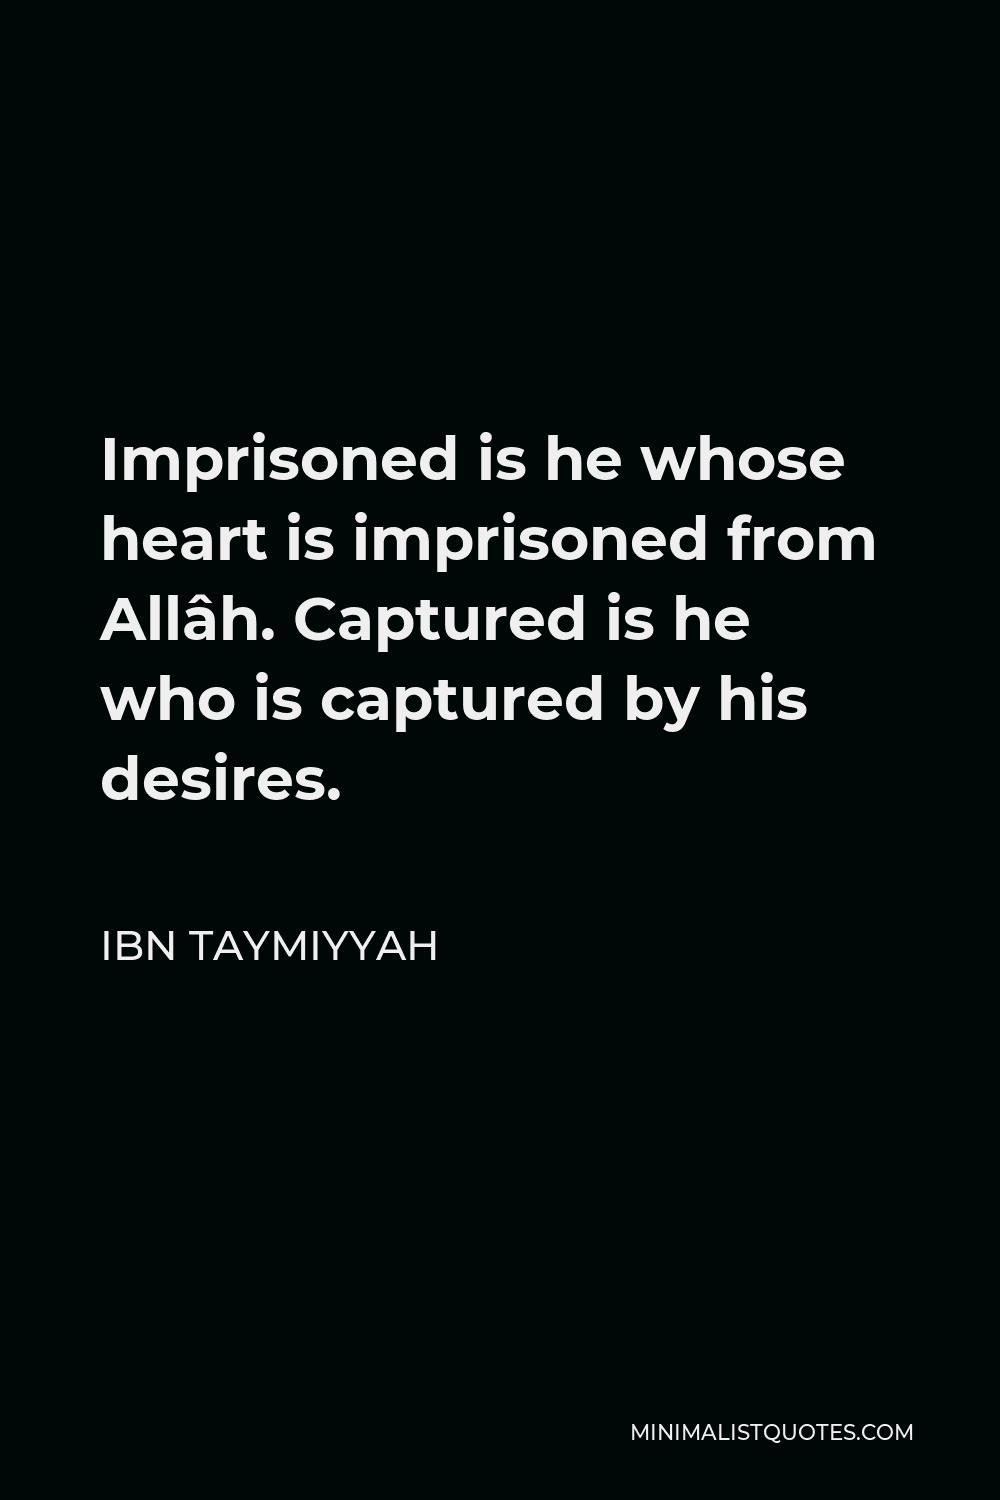 Ibn Taymiyyah Quote - Imprisoned is he whose heart is imprisoned from Allâh. Captured is he who is captured by his desires.